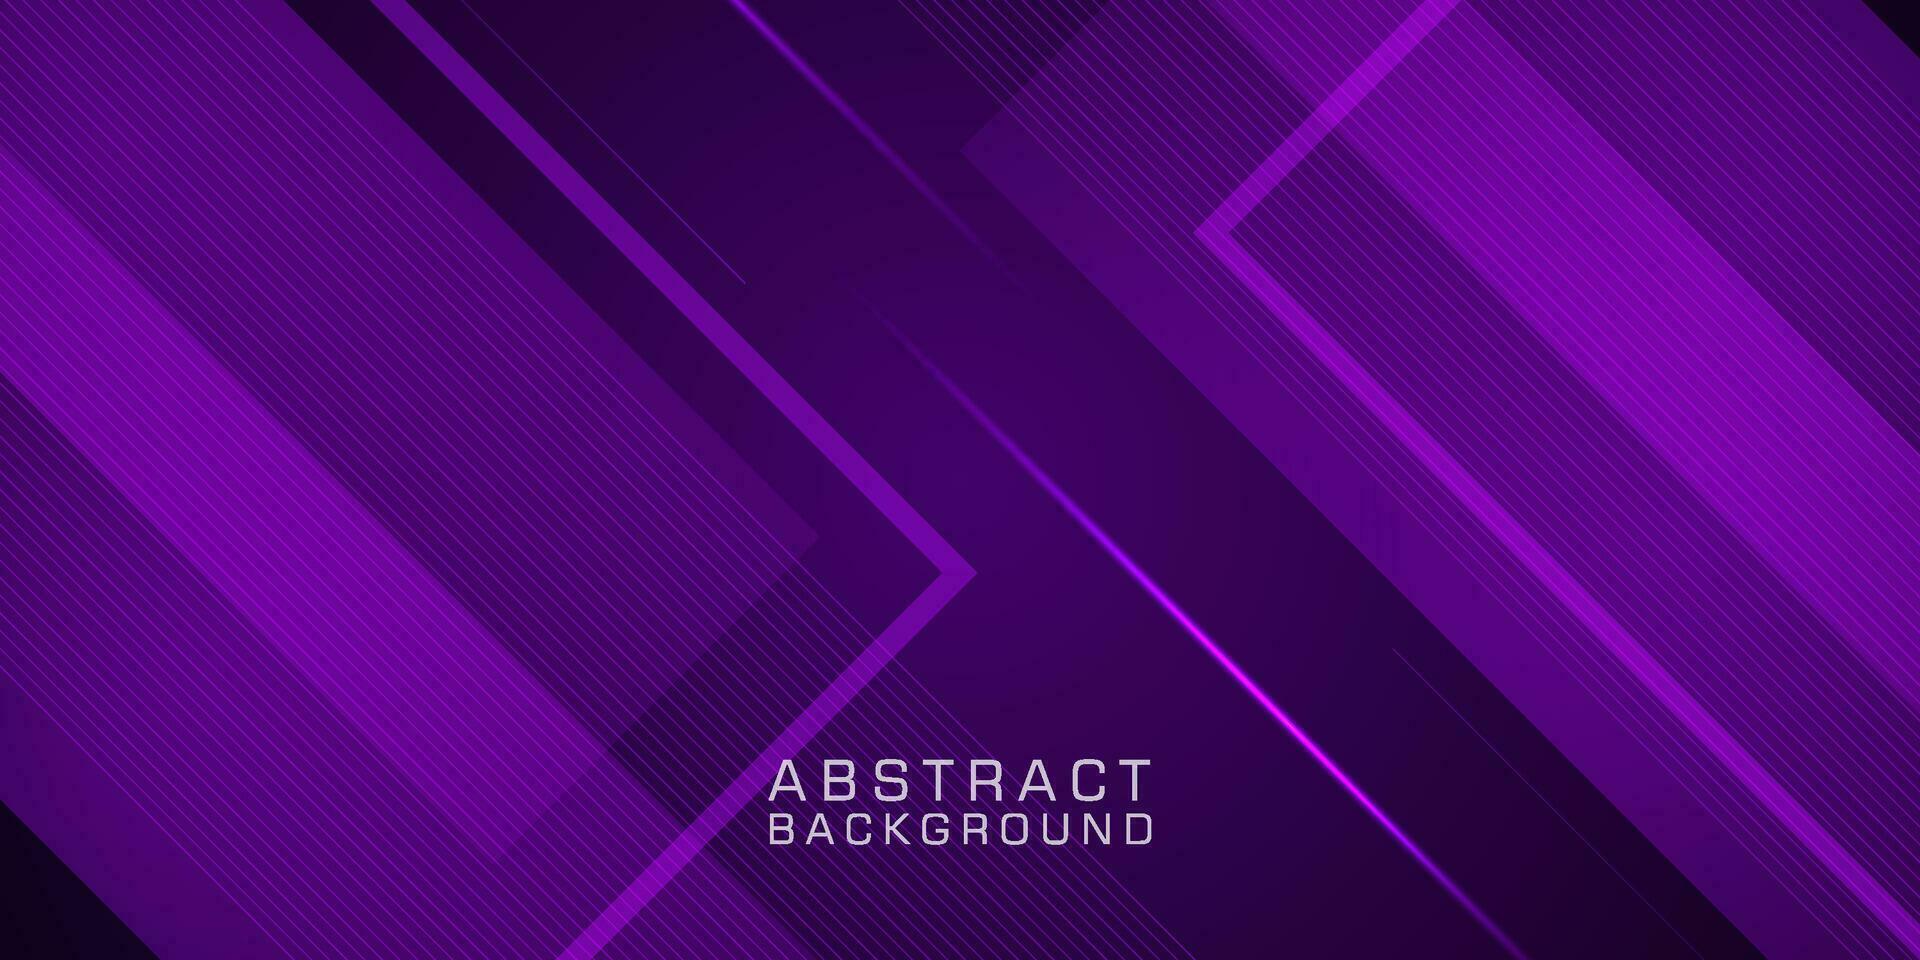 Abstract purple background with shadows and simple square lines. Looks 3d with additional light. suitable for posters, brochures, e-sports and others. eps10 vector